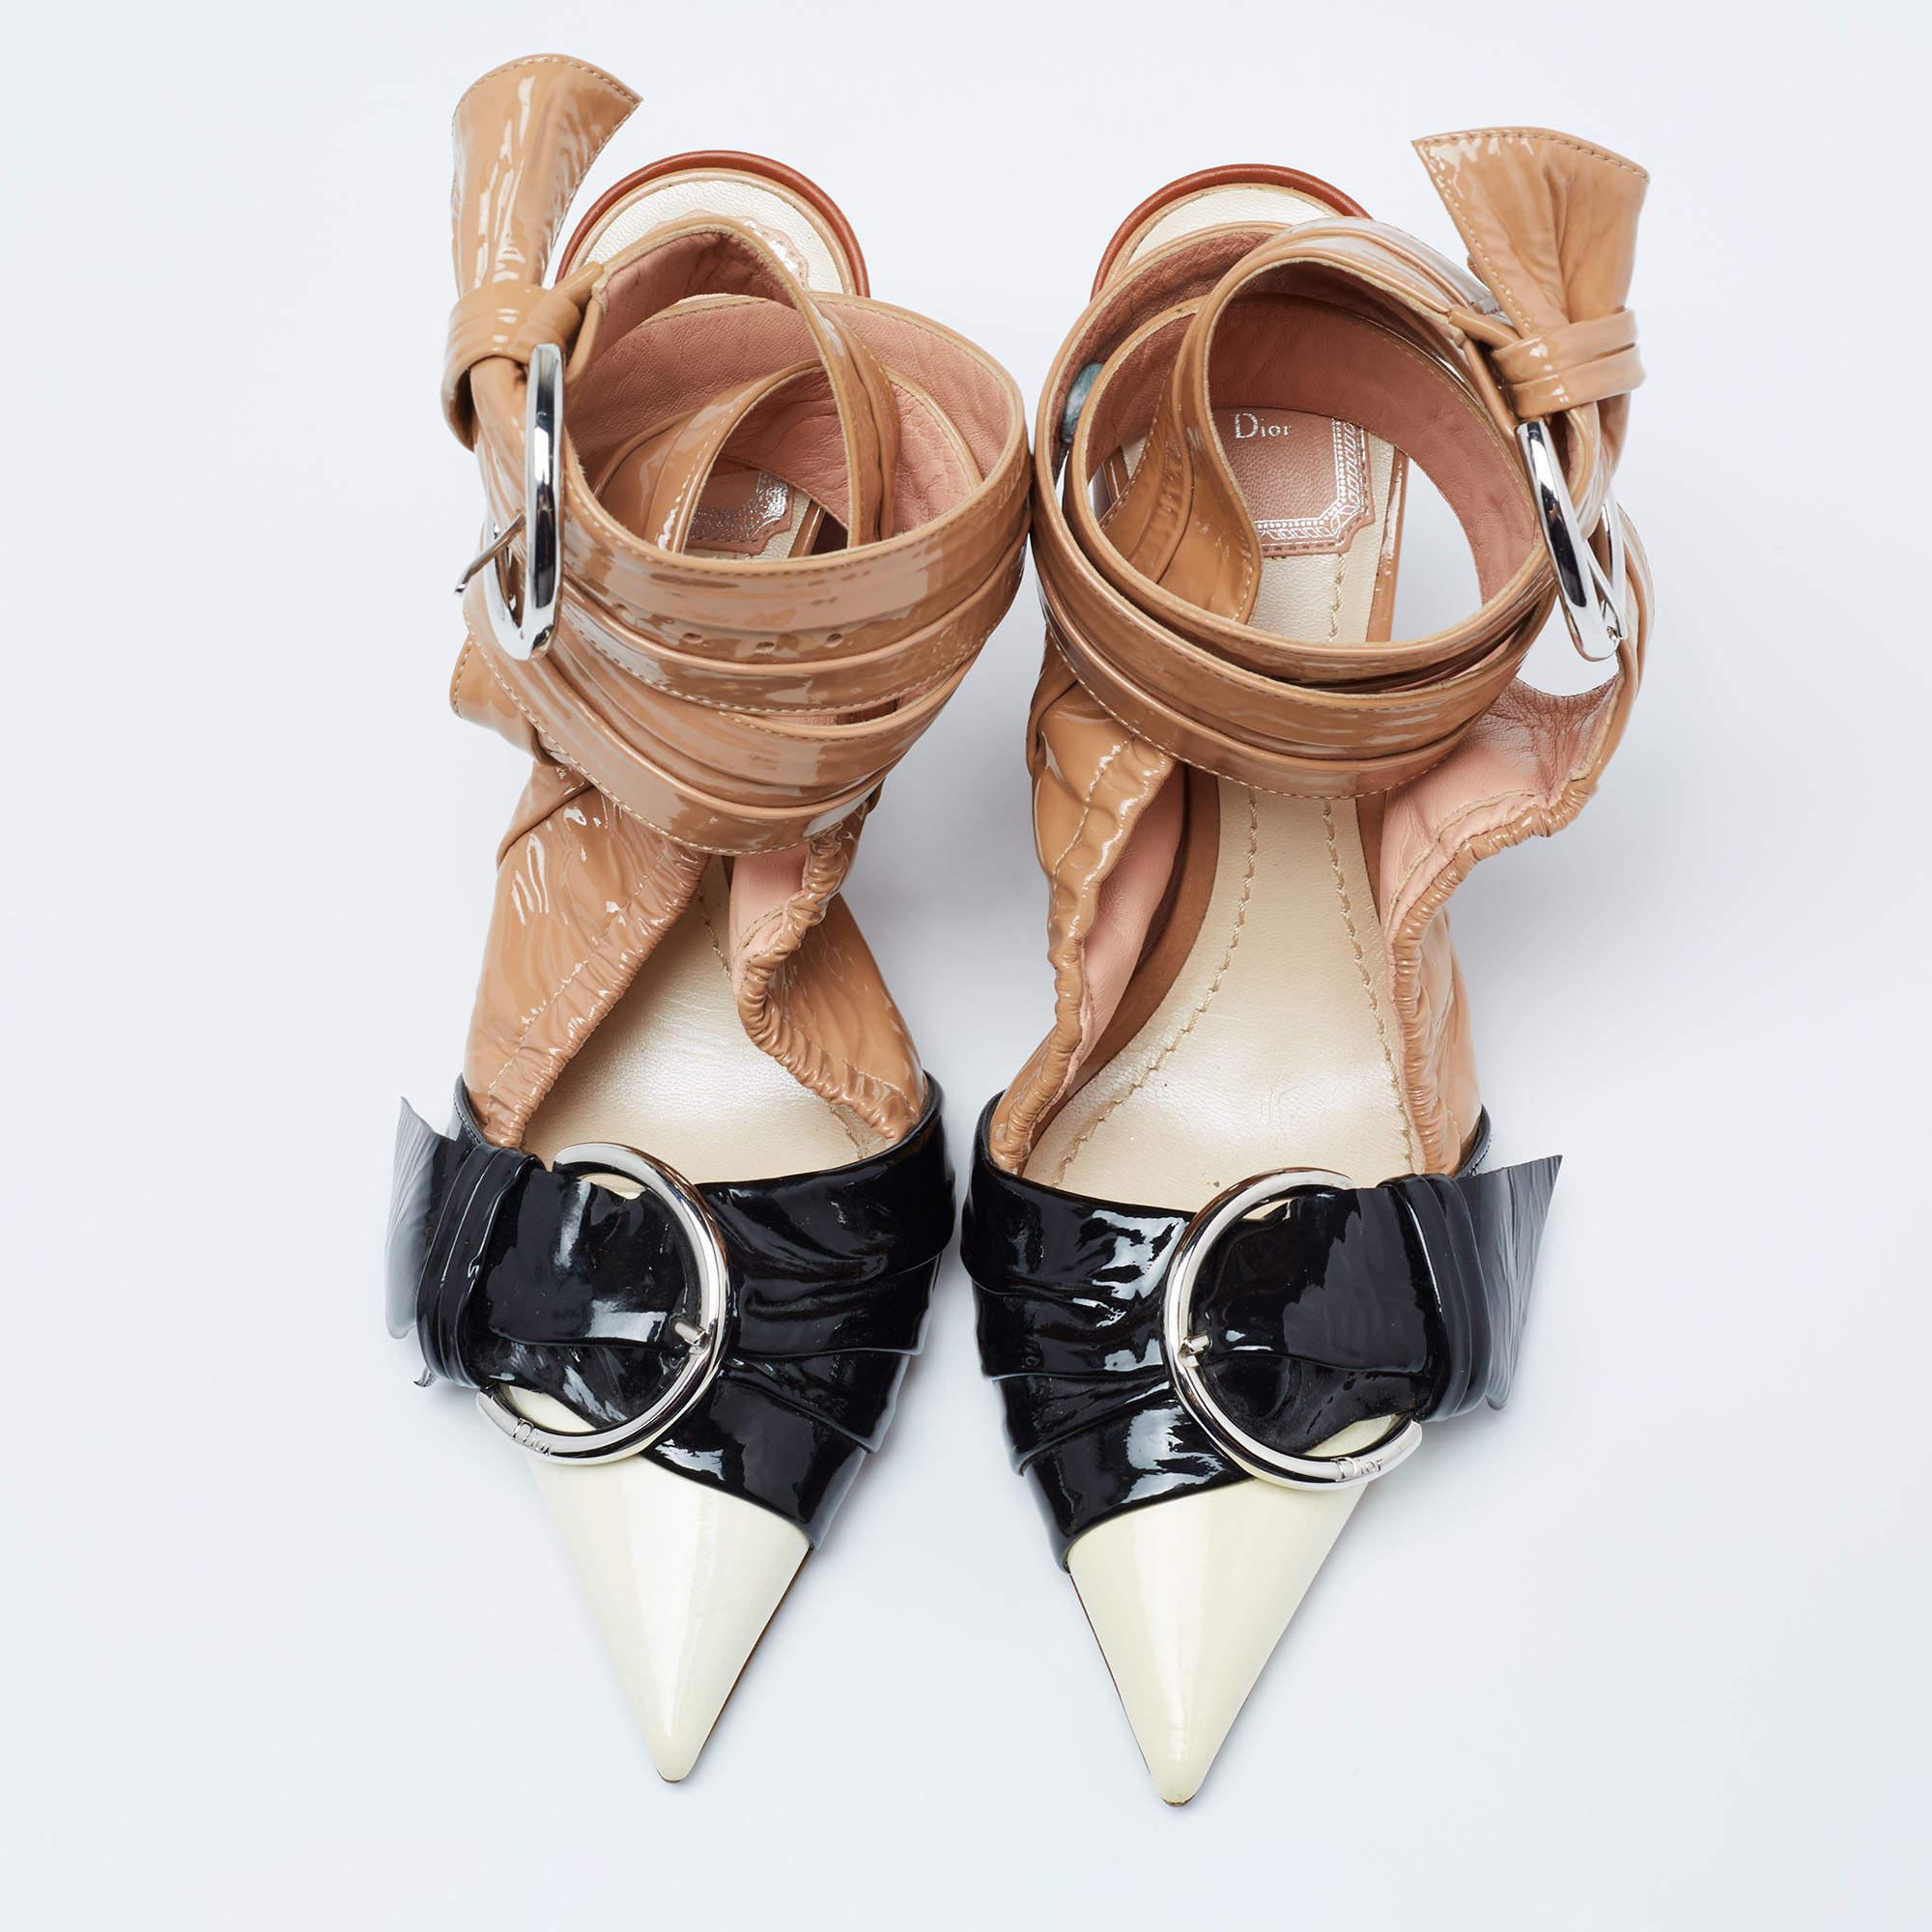 These sandals from Dior are absolutely stunning with their avant-garde details. Crafted from glossy patent leather, they flaunt multicolored hues and exude effortless style. They are styled with pointed toes, buckle detailing on the uppers, ankle